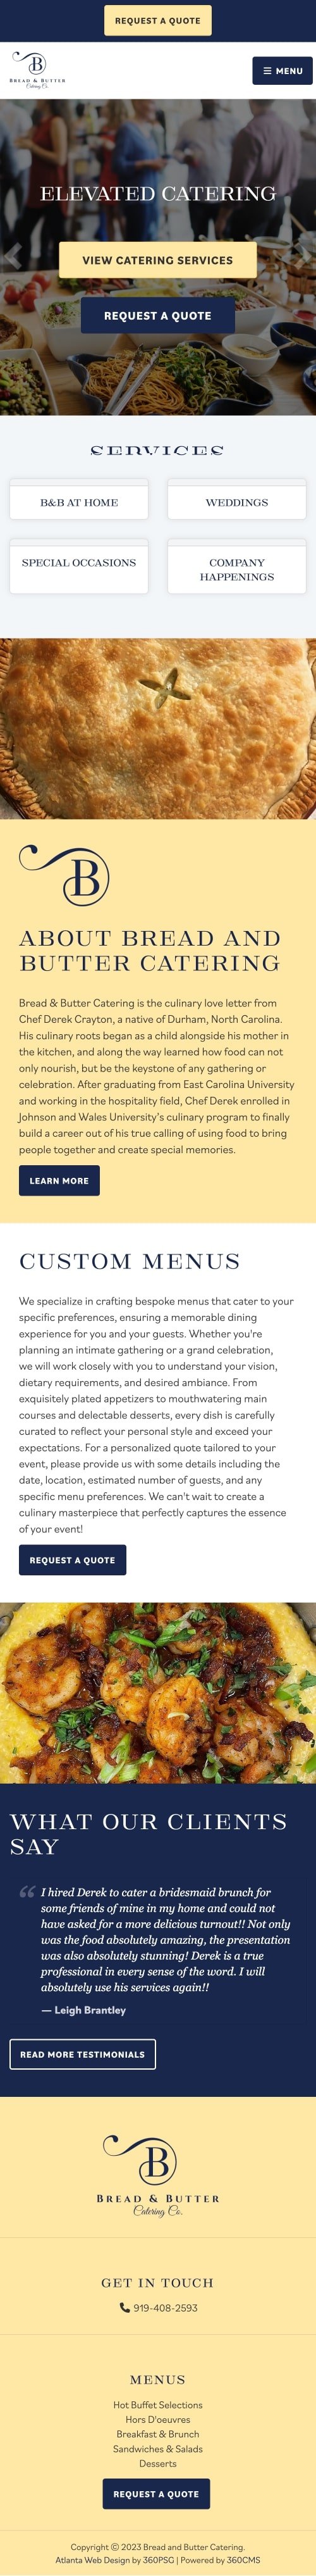 Bread & Butter Catering Website - Mobile